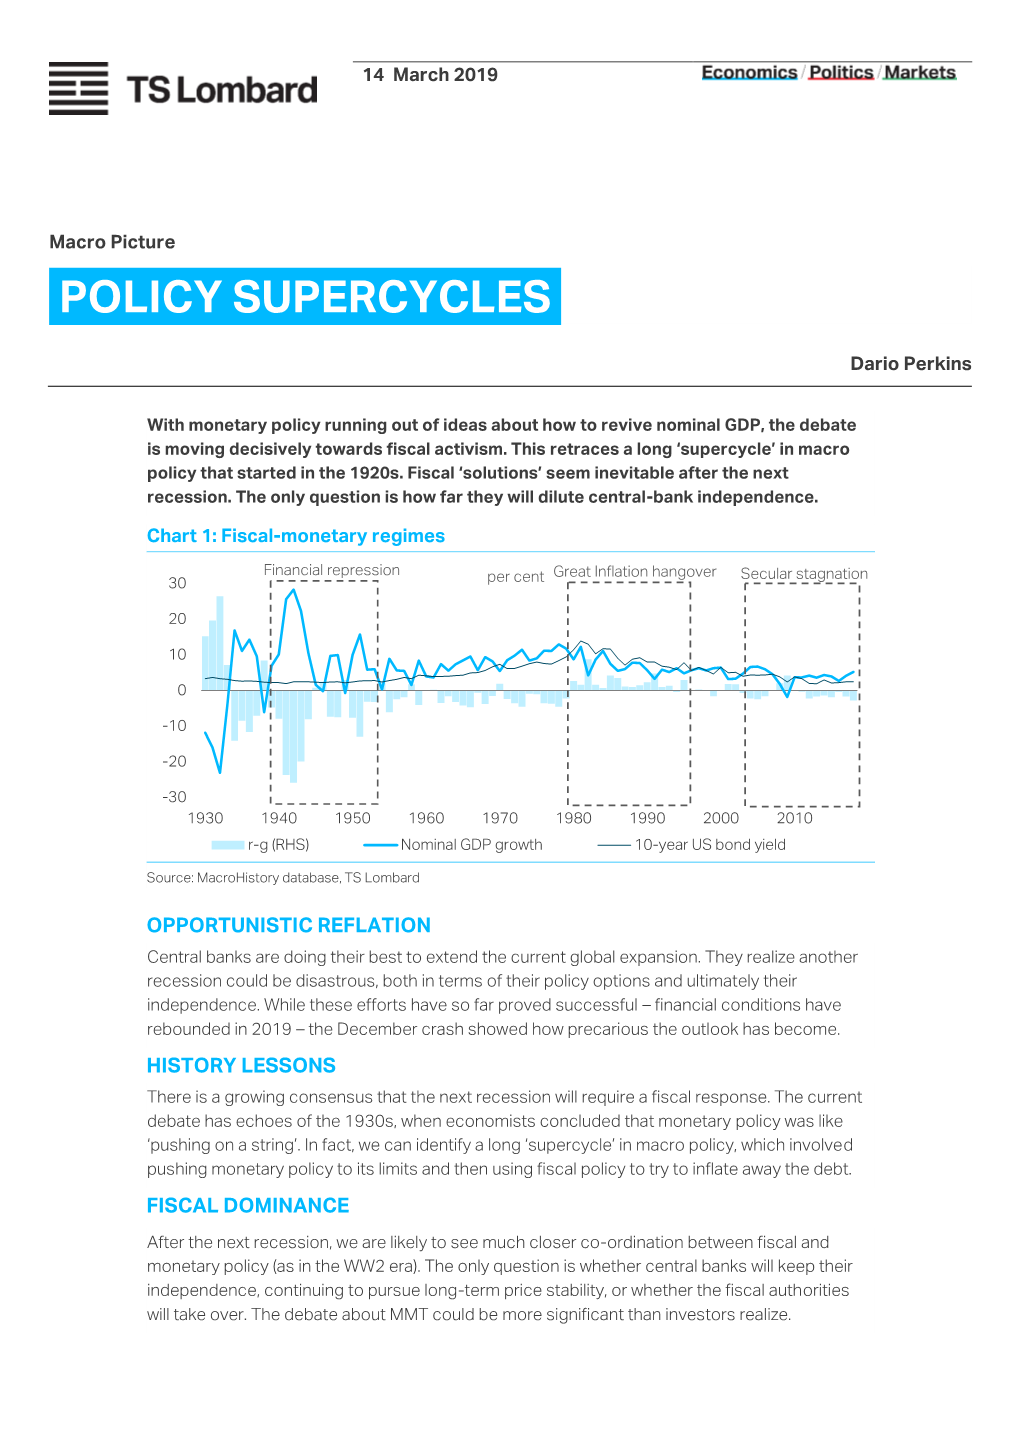 Policy Supercycles